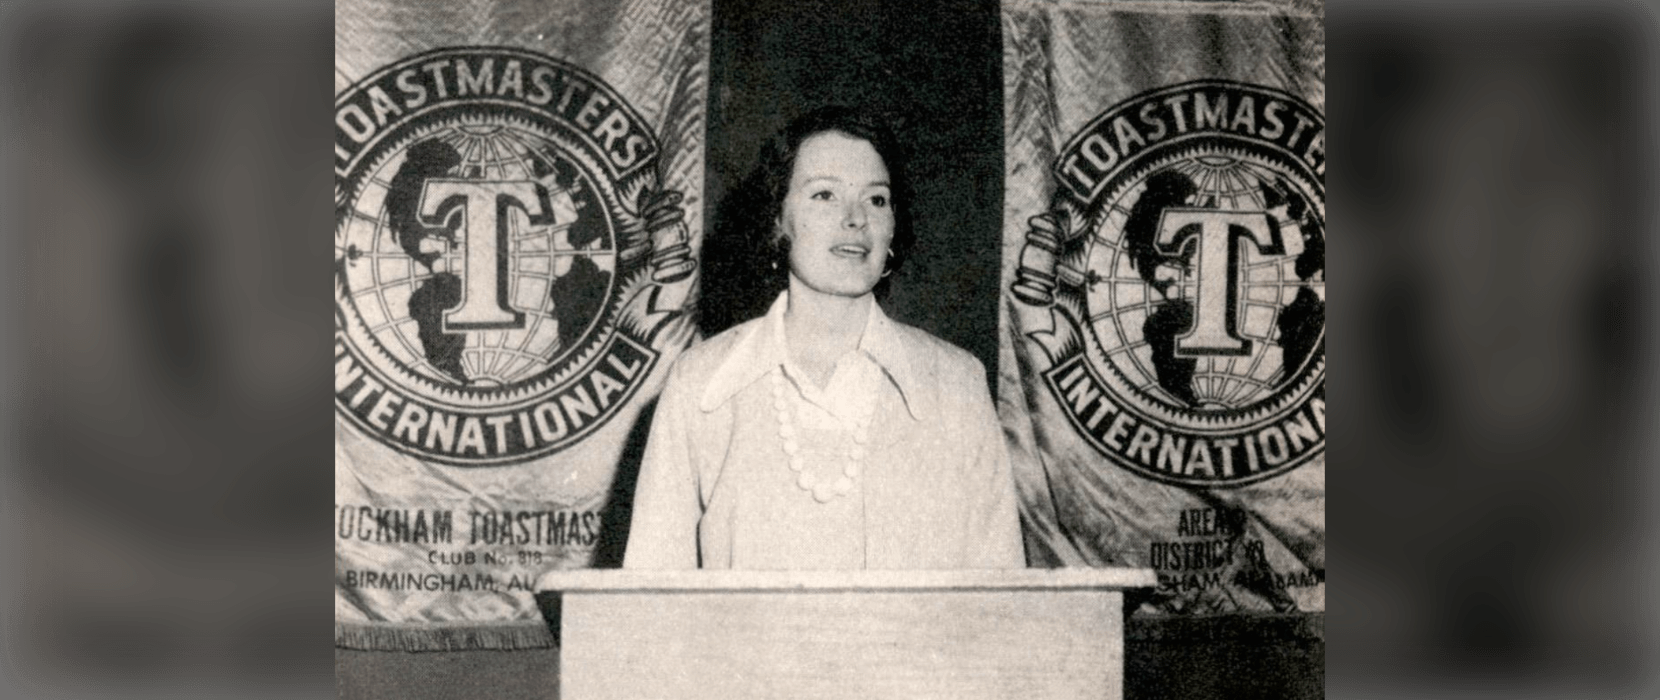 Black and white image of a woman speaking at a lectern